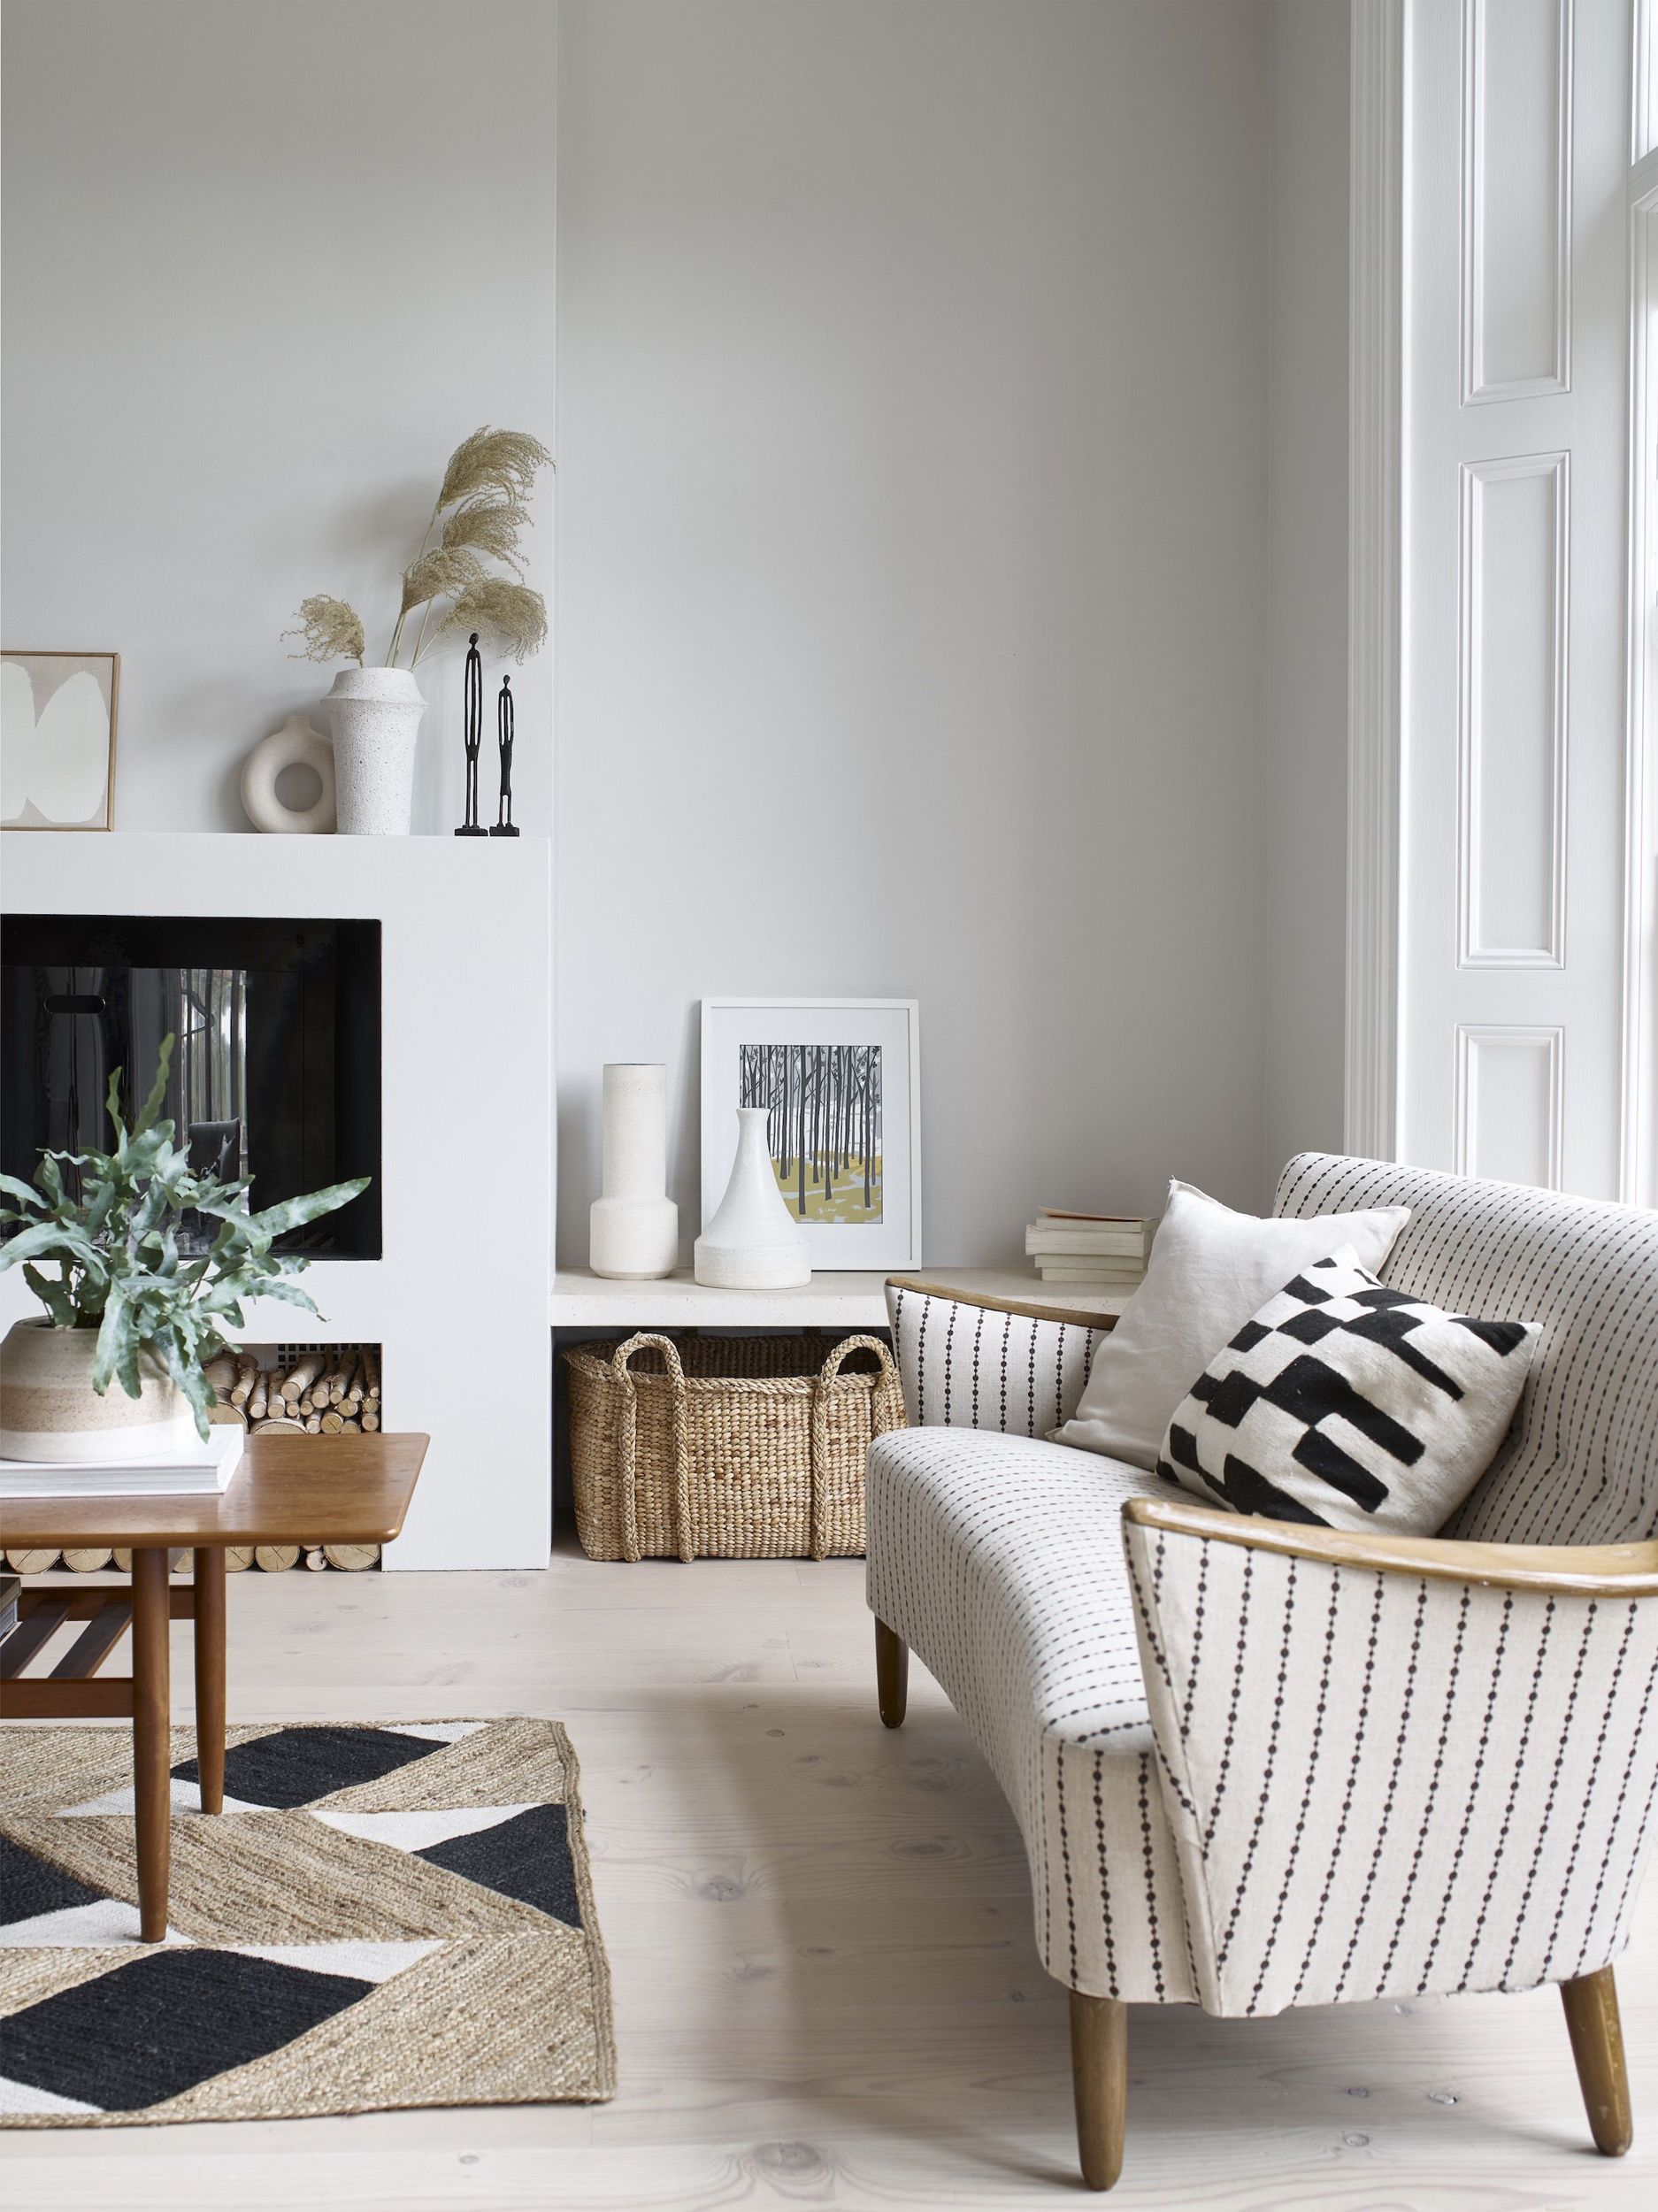 How to brighten a dark room with white and off-white paint